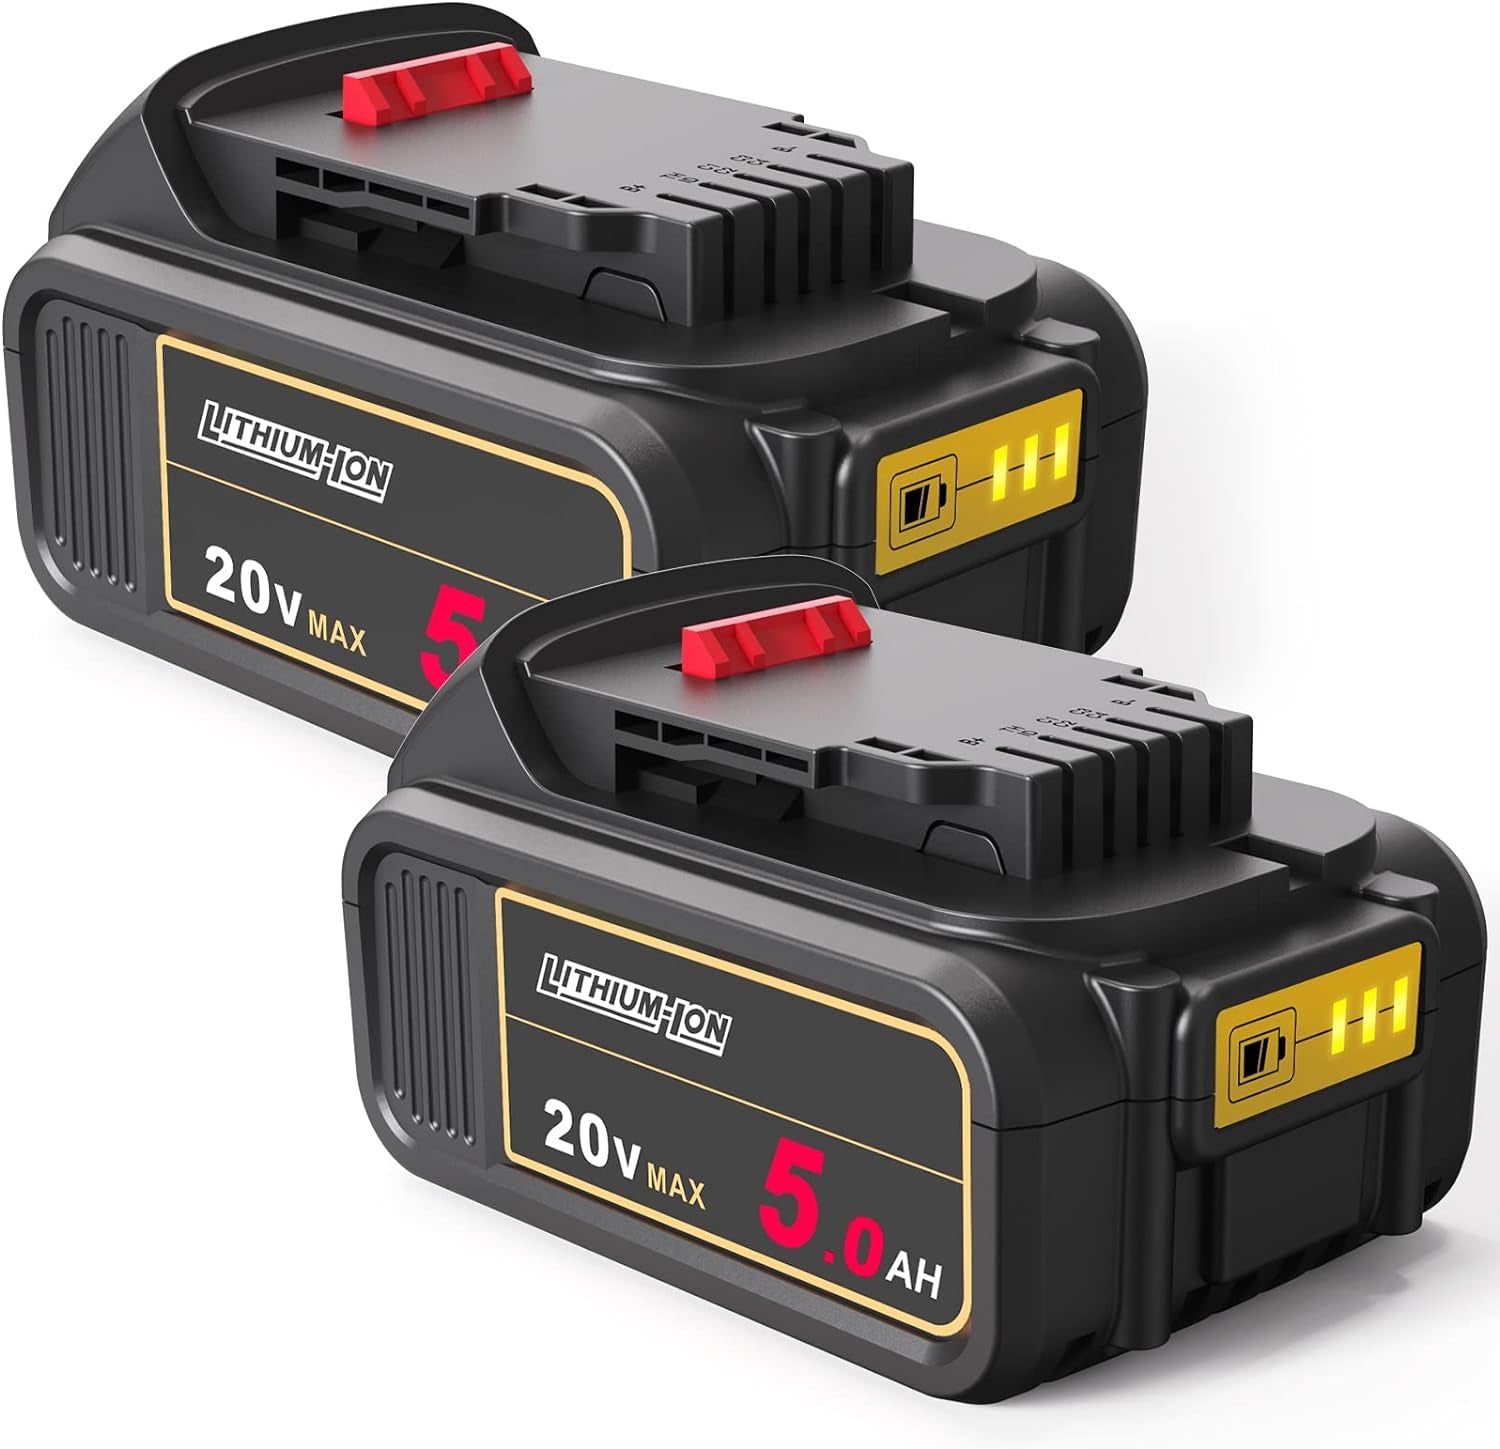 20V Battery Replacement for Dewalt 20V Battery 5.0Ah, Compatible with DCB206 DCB200 DCB201 DCB204 20 Volt Lithium-Ion MAX DCD/DCF/DCG Series Cordless Tools & Chargers DCB112 DCB115 2-Pack